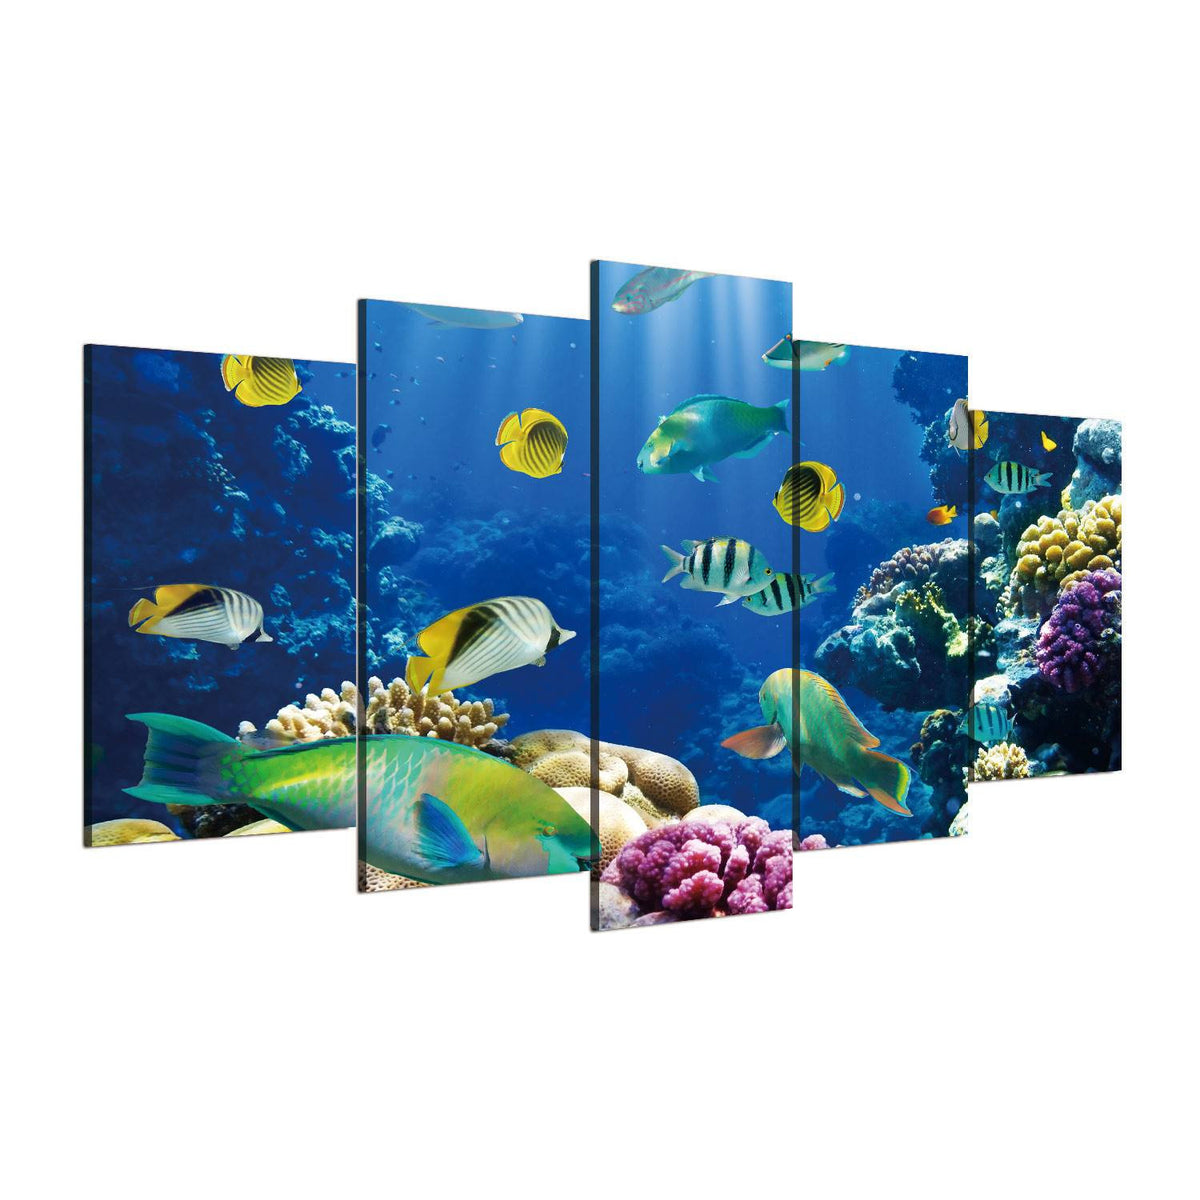 Going Underwater 5 Piece Canvas Wall Art – Vigor and Whim